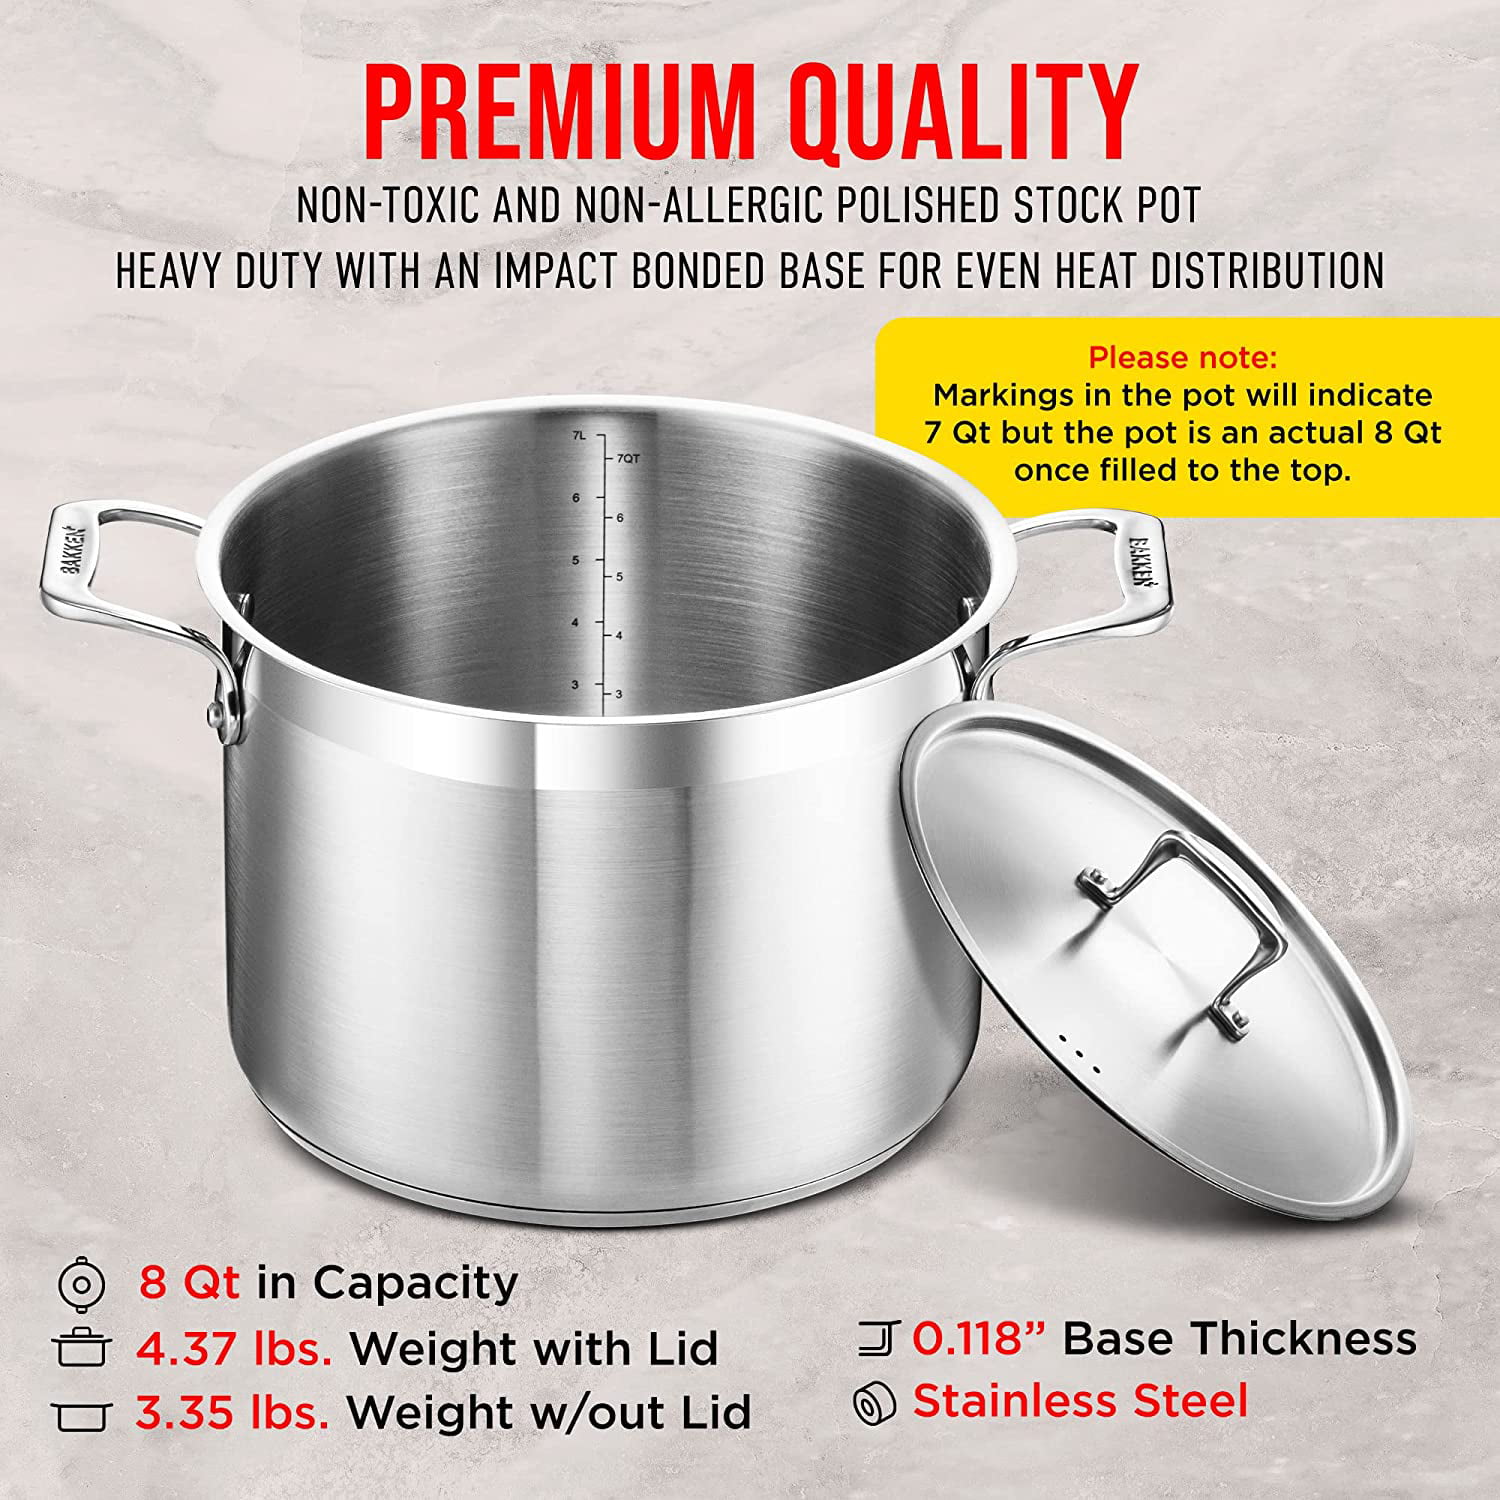 Bakken- Swiss Stockpot 12 Quart Brushed Stainless Steel Heavy Duty Induction Pot with Lid and Riveted Handles for Soup Seafood Stock Canning and F